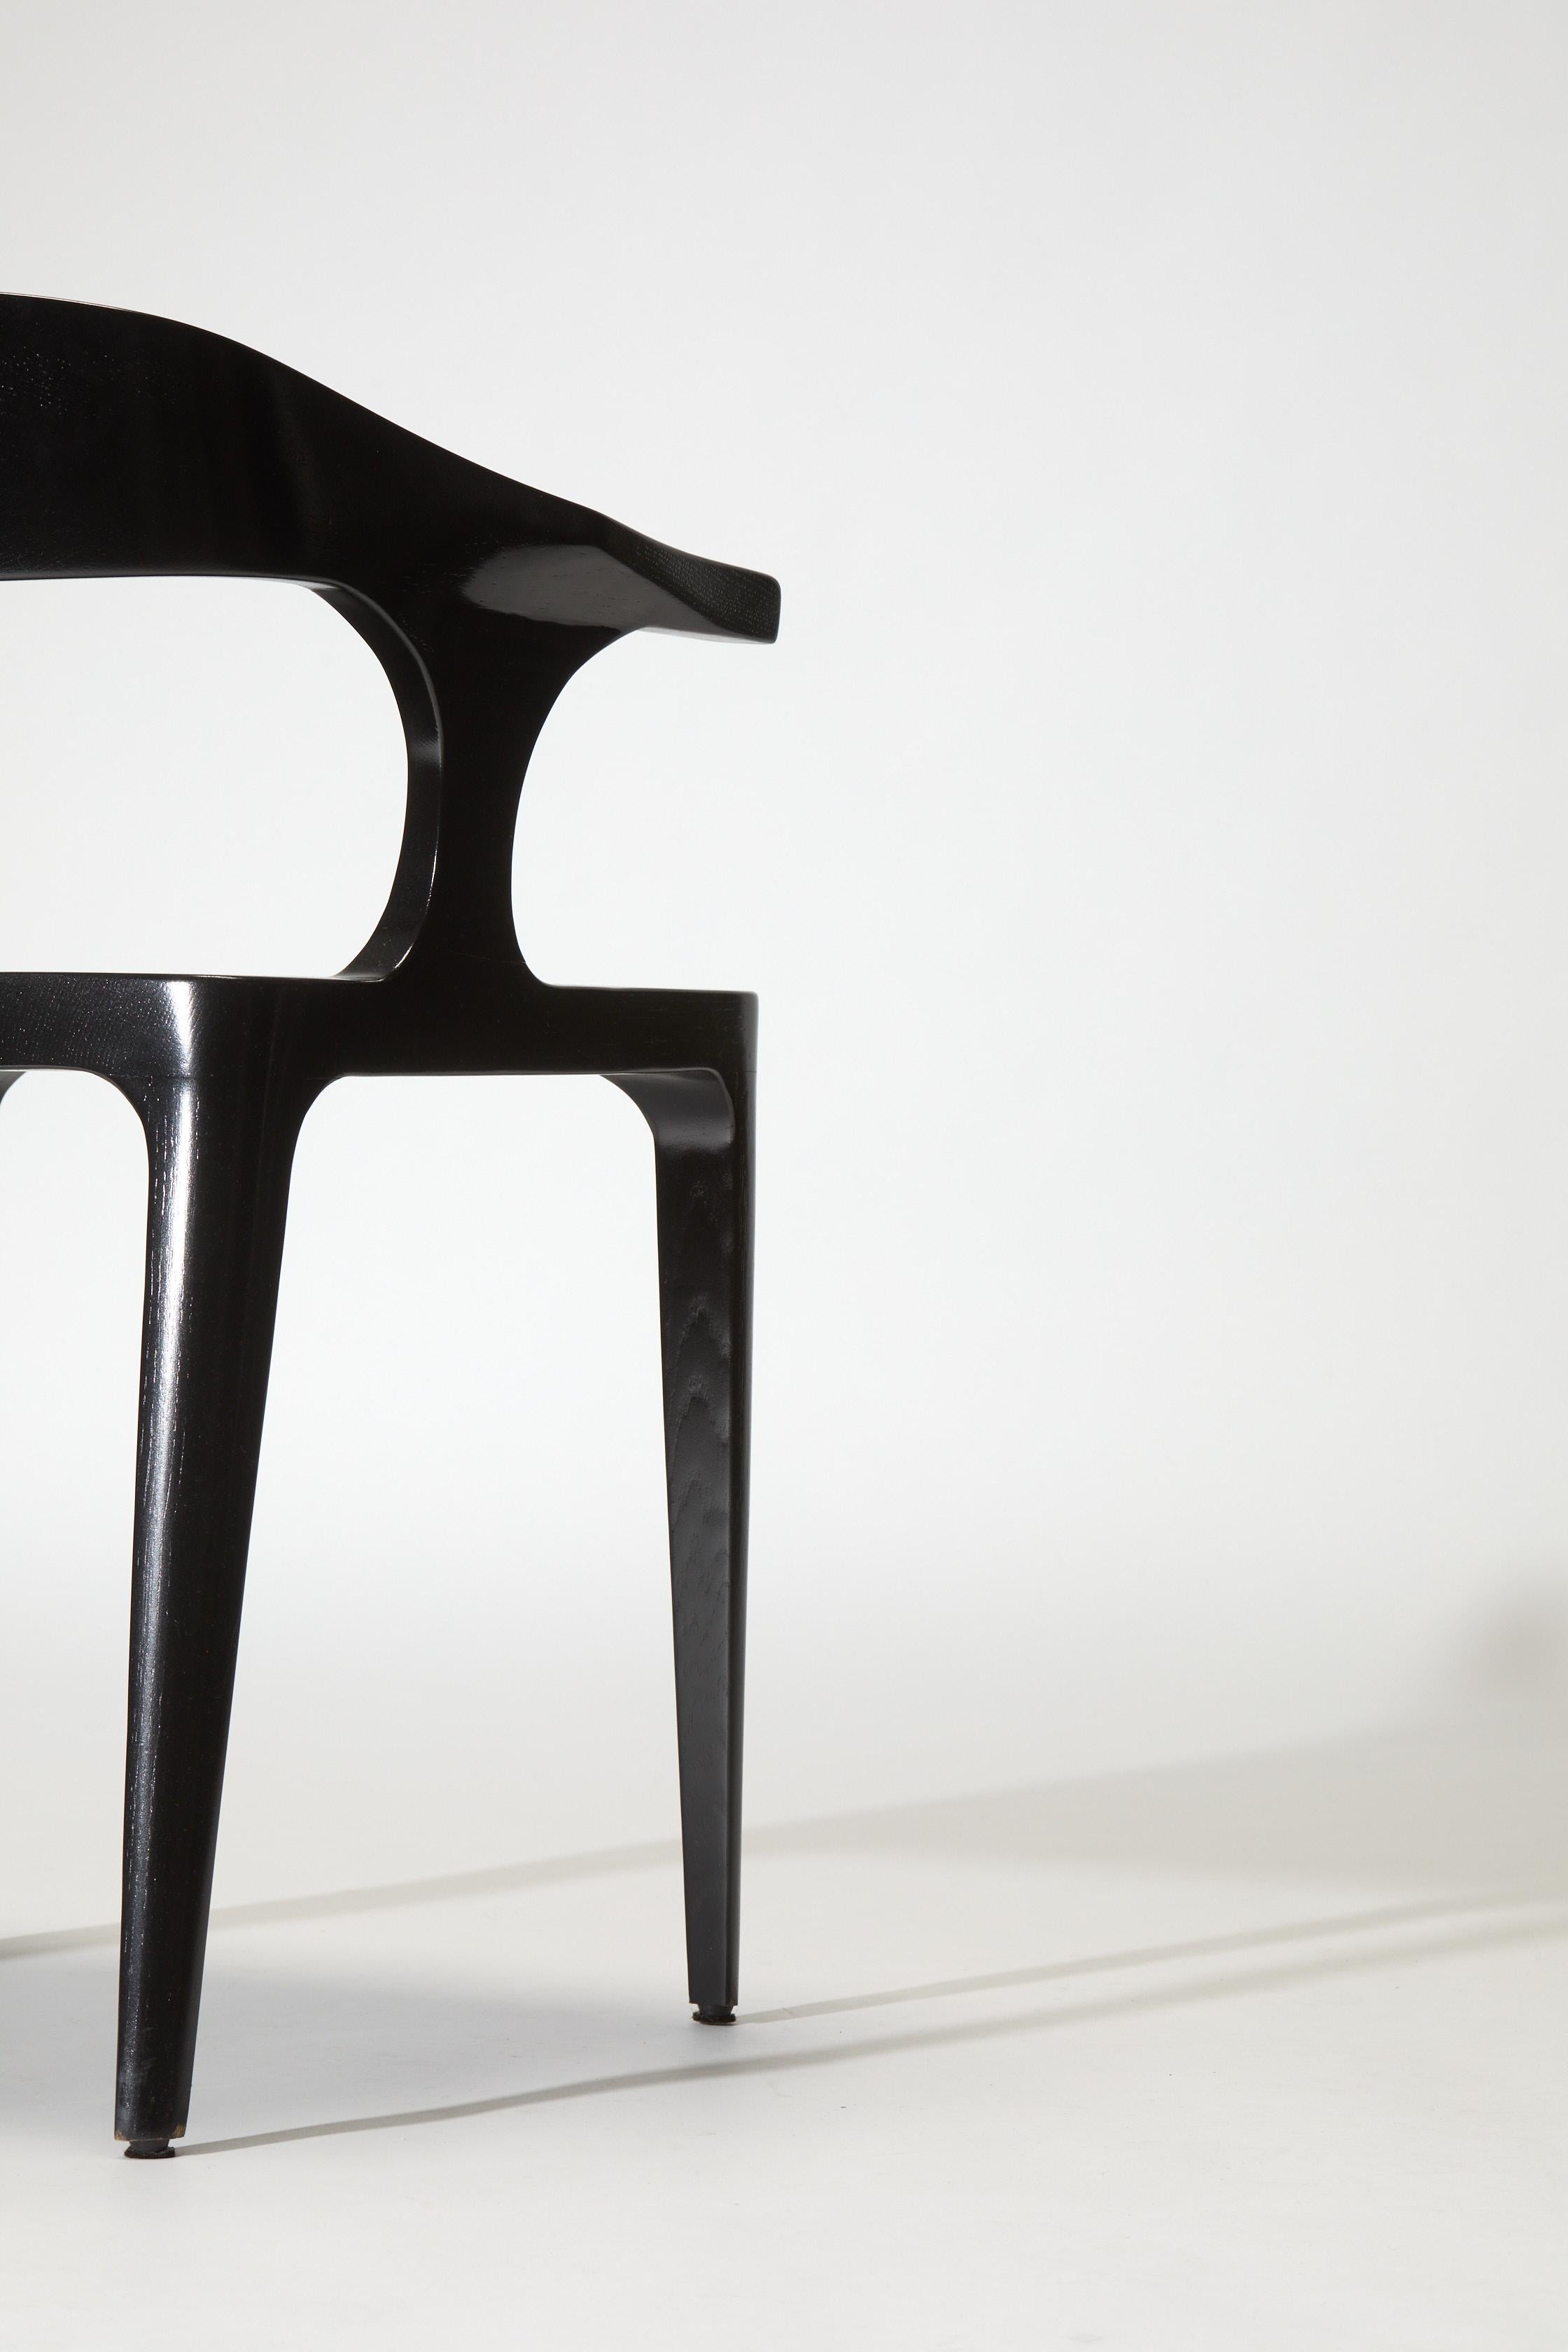 Oiled Chair, EILEEN, by Reda Amalou Design, 2020, Blackened Ash